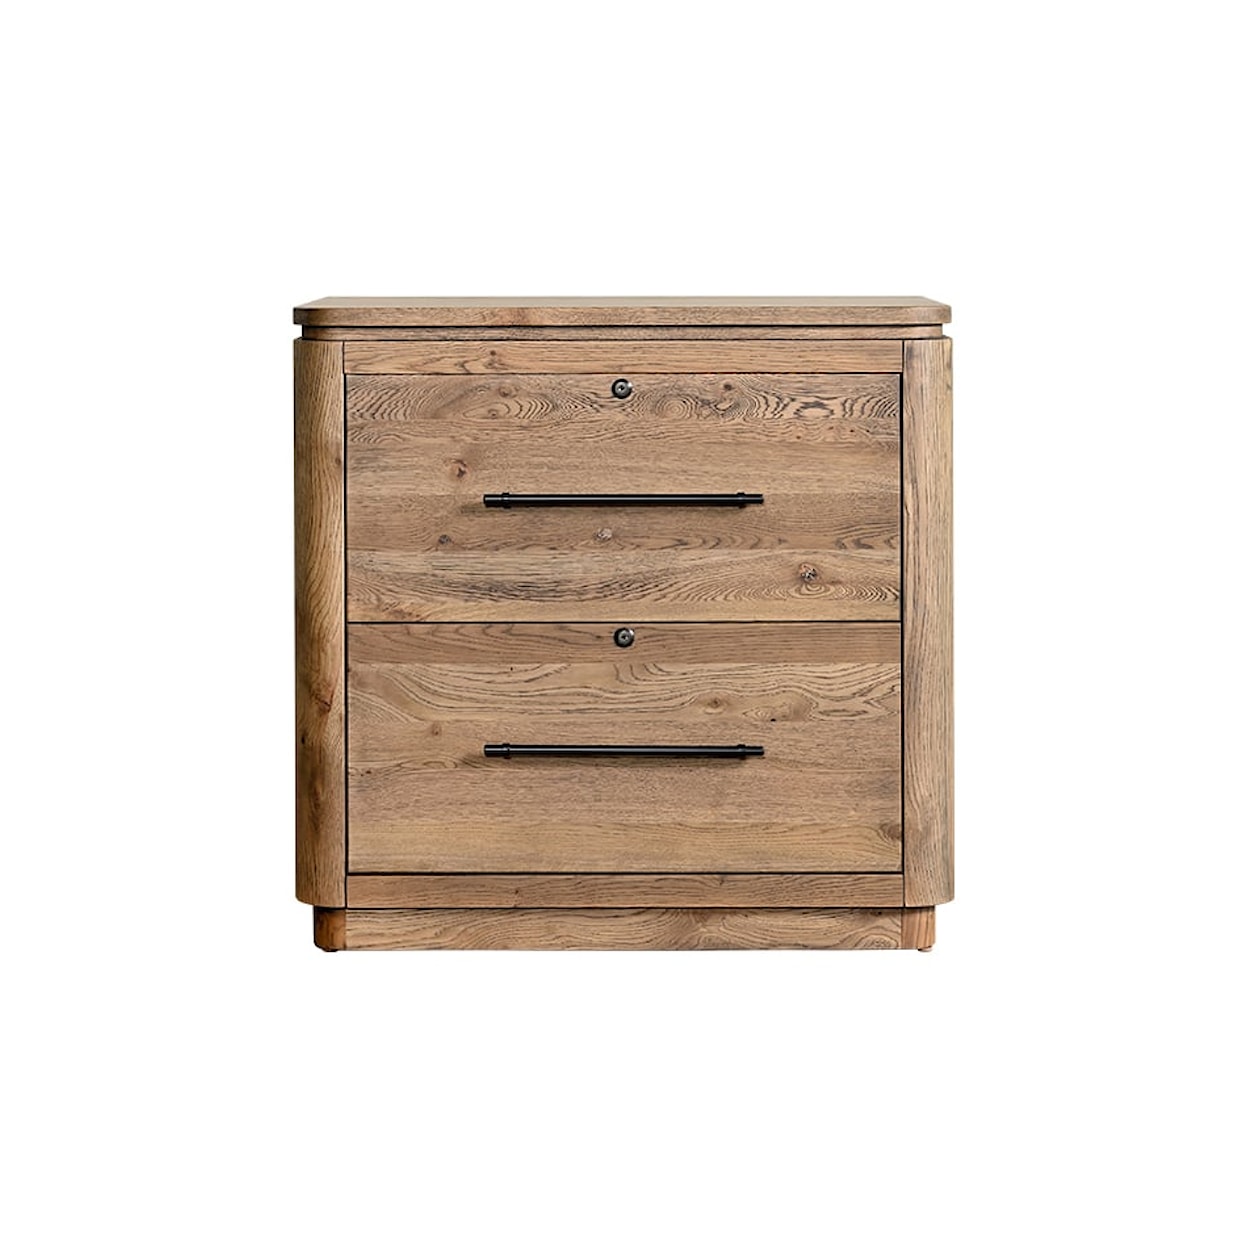 Yutzy Woodworking Rialto Two Drawer File Cabinet